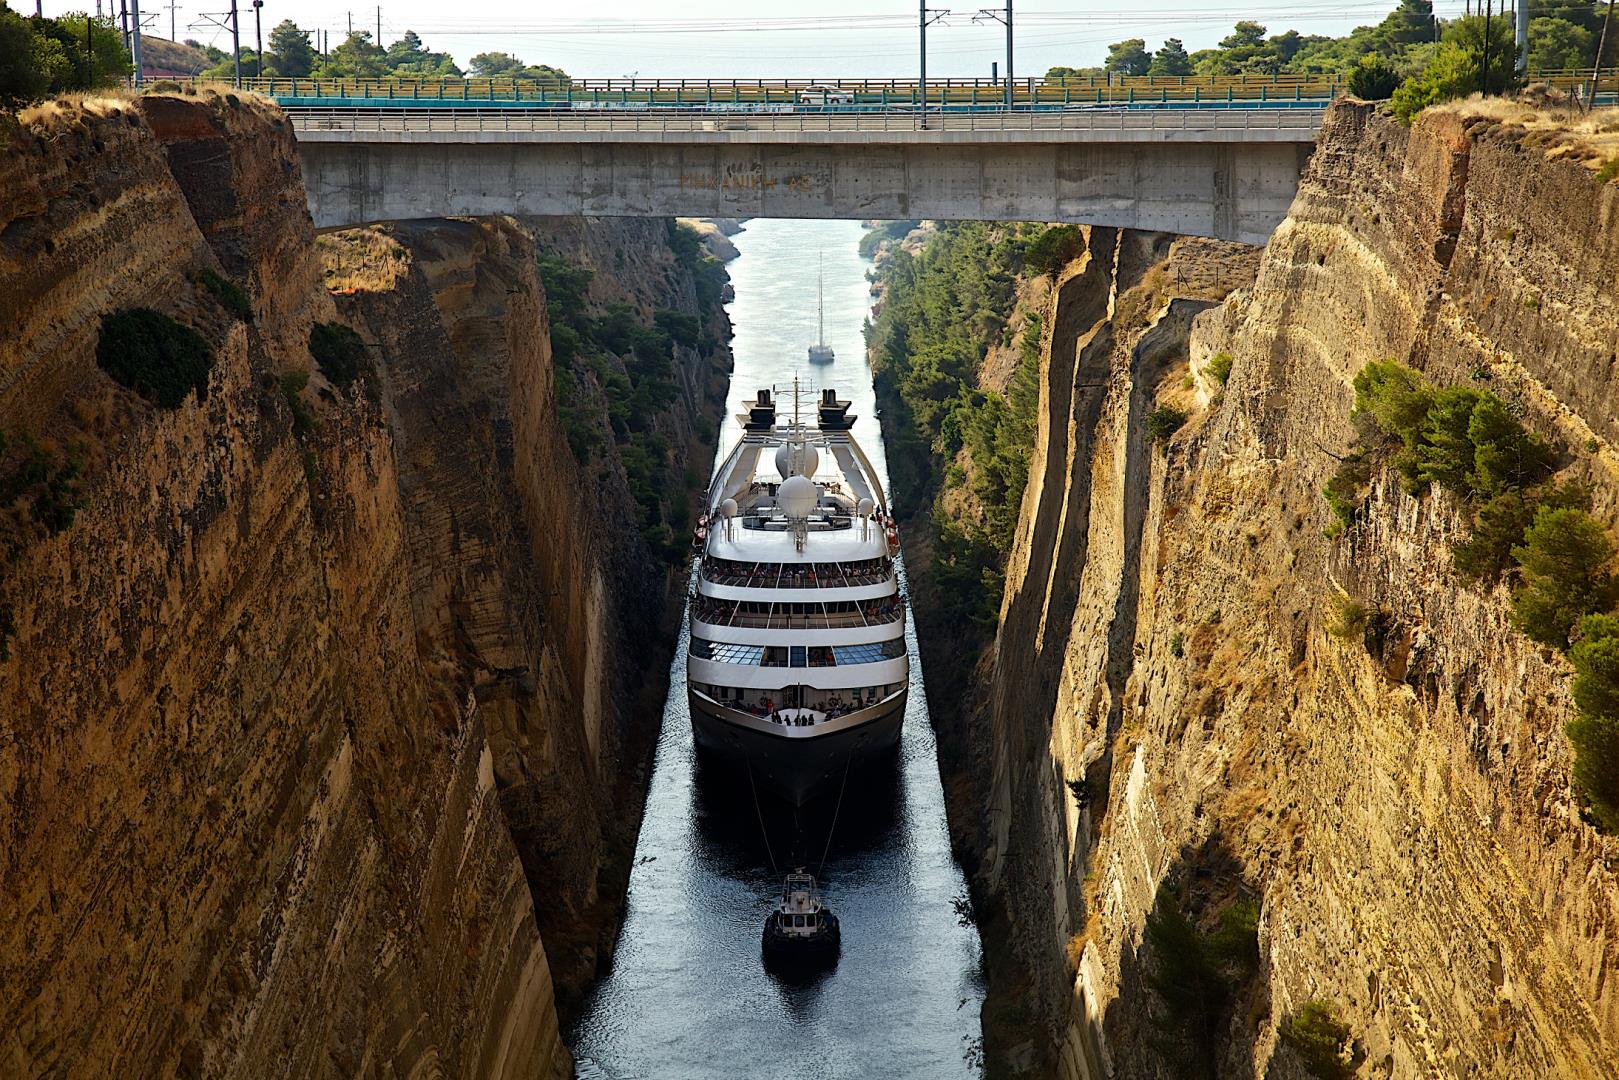 View of Star Pride crossing the Corinth Canal in Greece